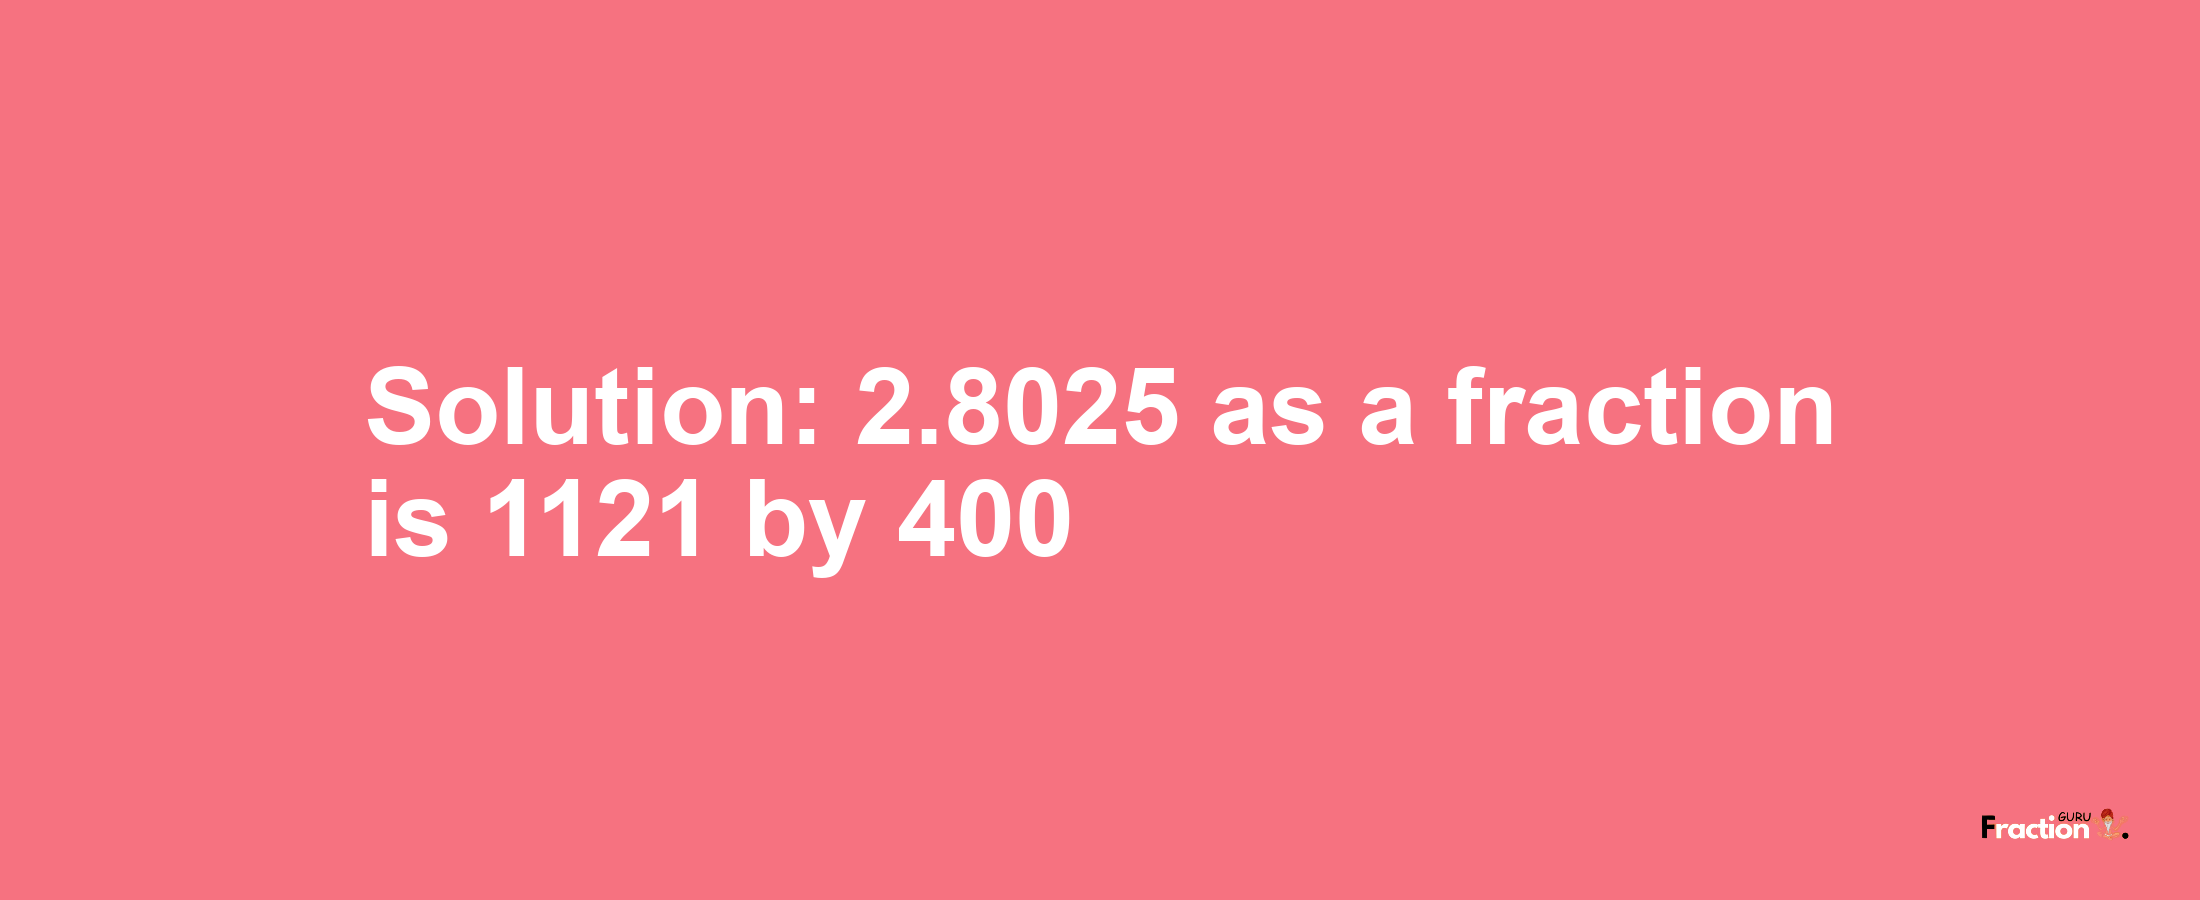 Solution:2.8025 as a fraction is 1121/400